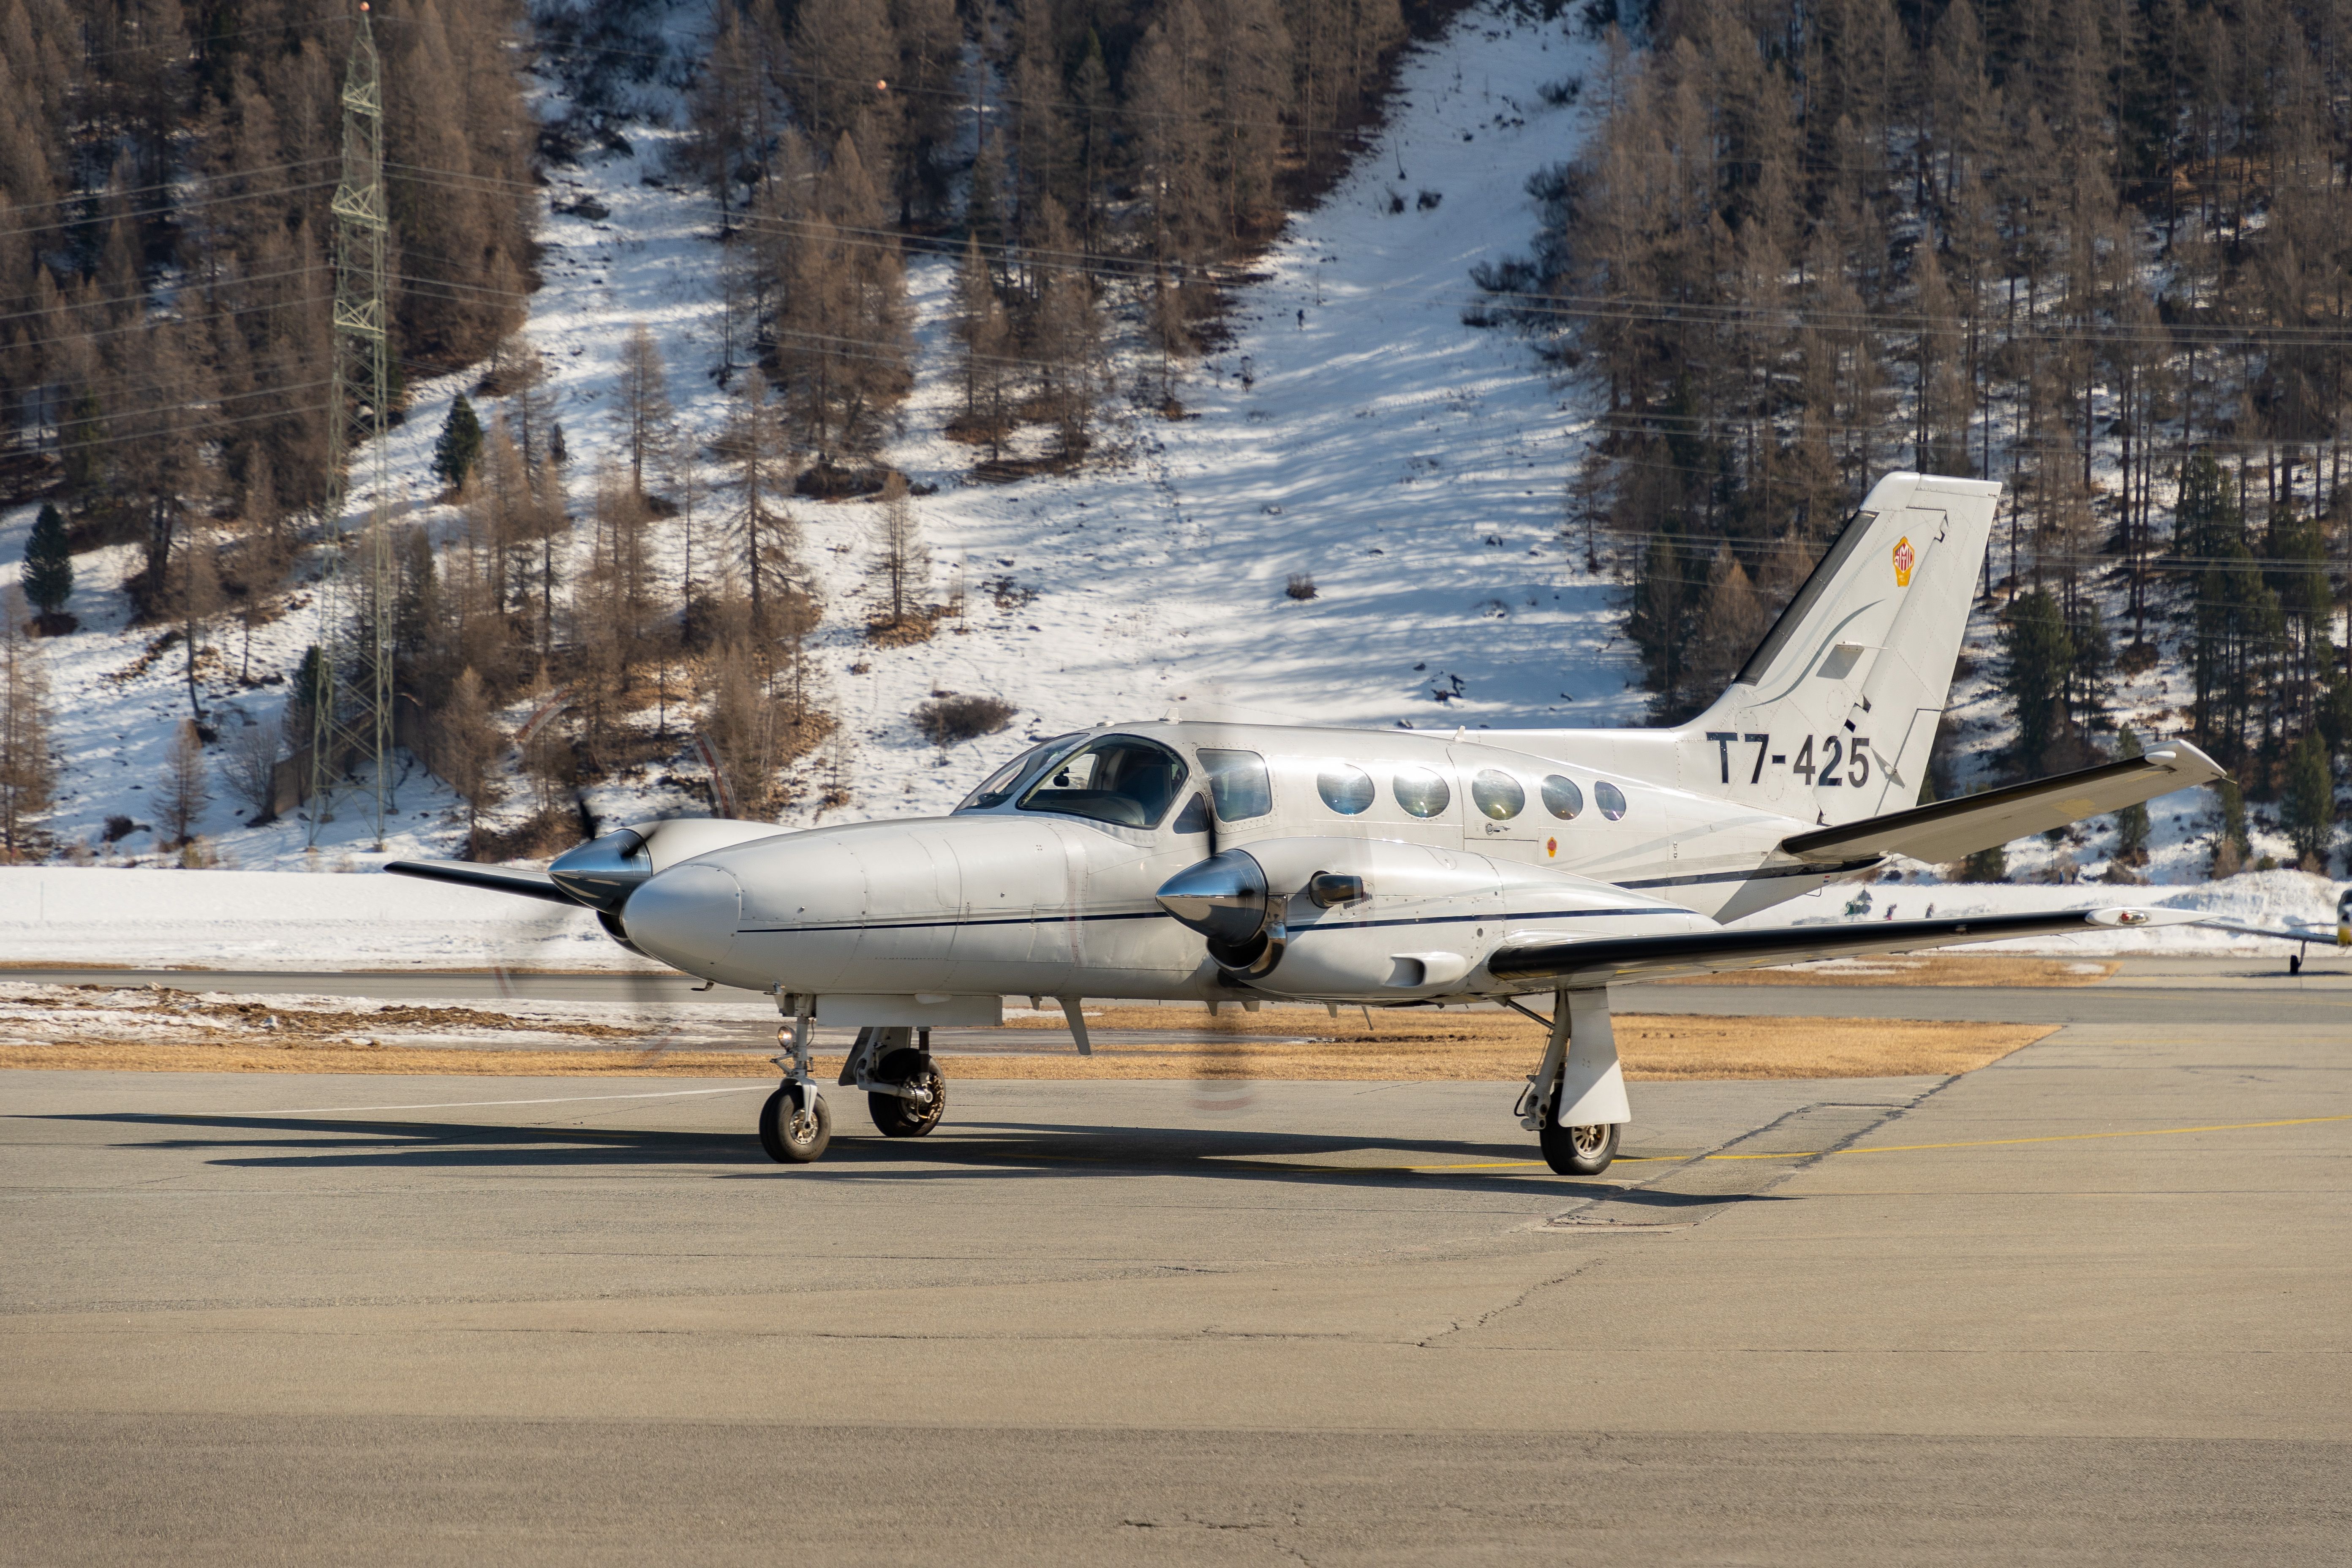 A Cessna 441 Conquest II on an airport apron in Switzerland.